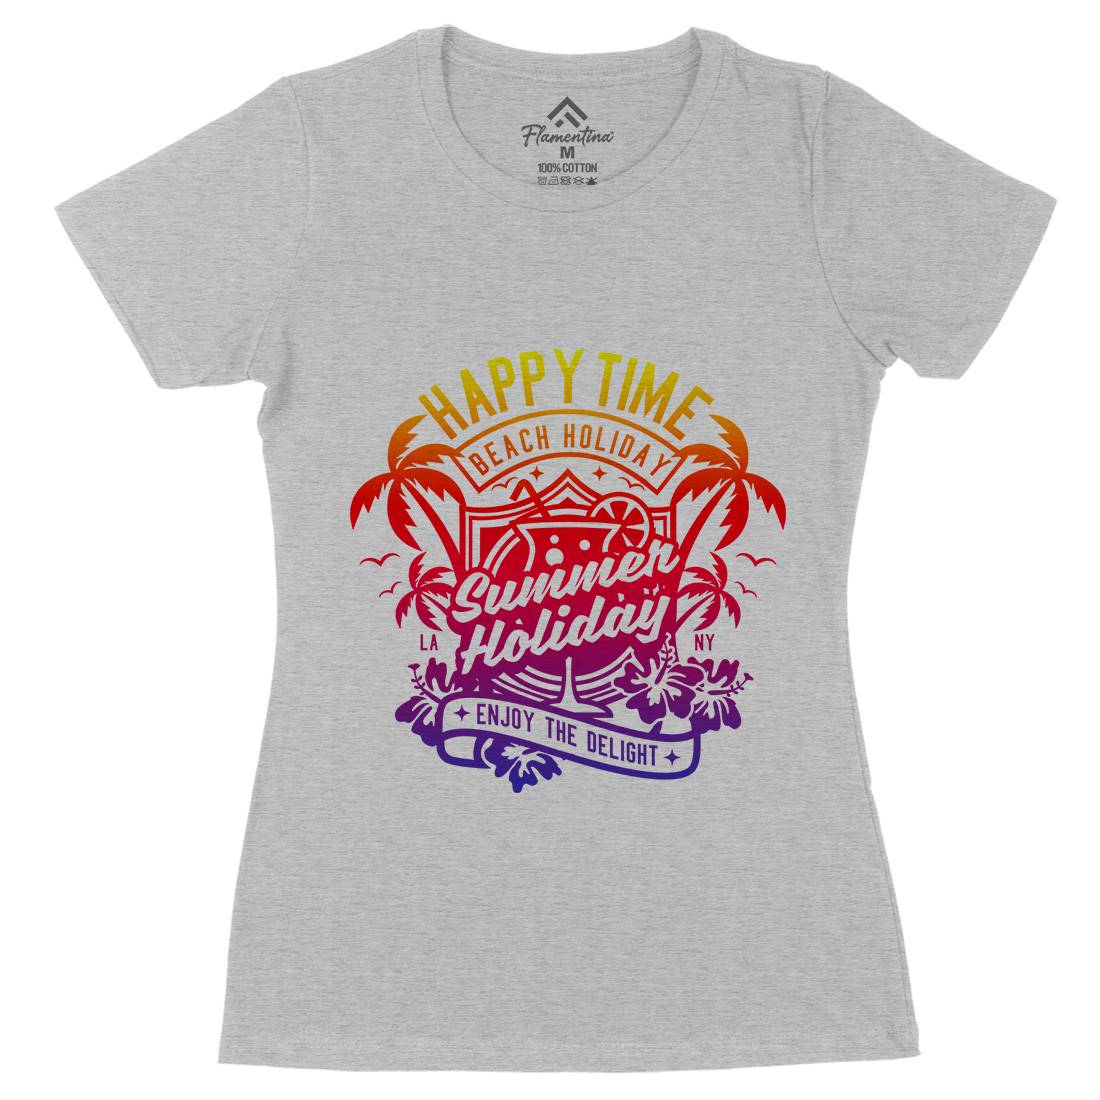 Happy Time Womens Organic Crew Neck T-Shirt Surf A238